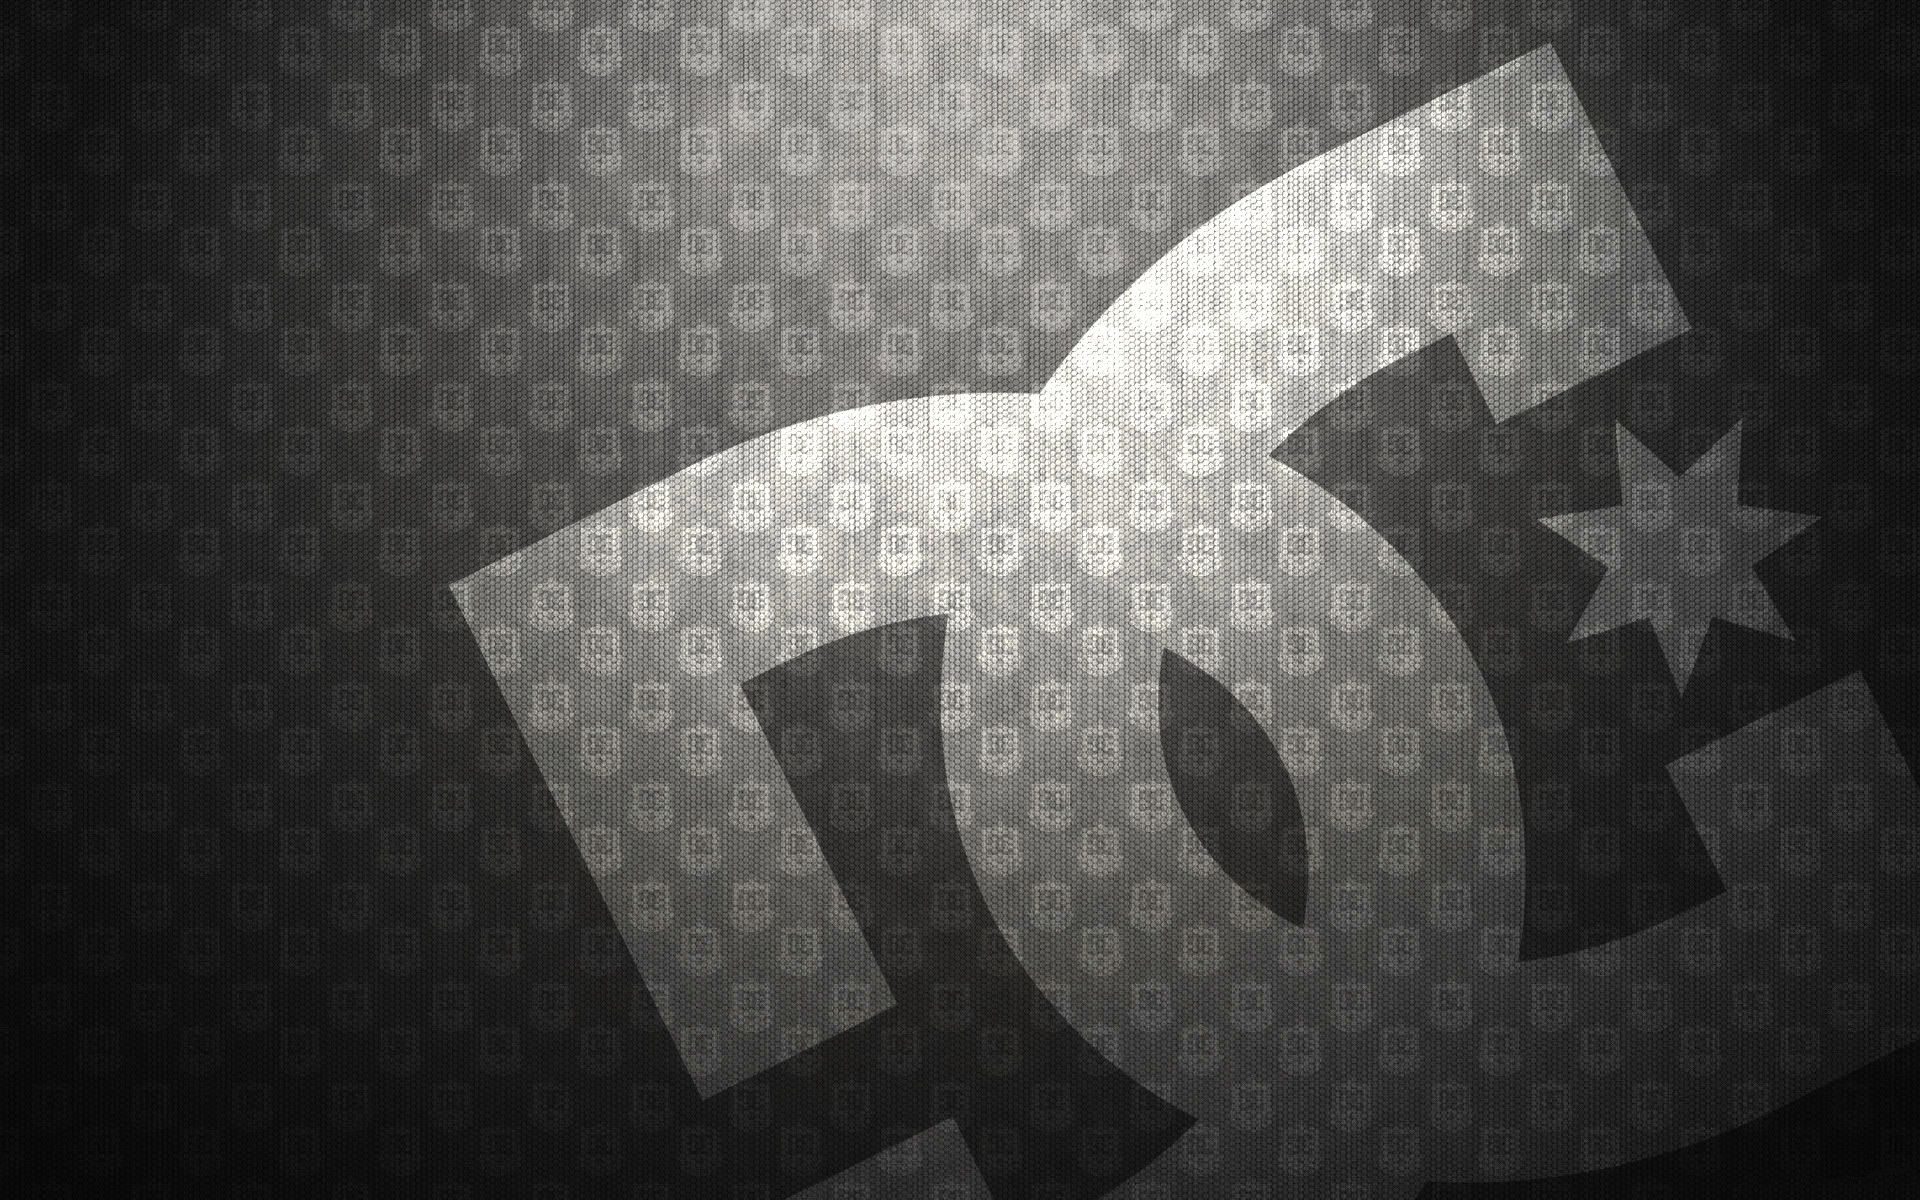 Products DC Shoes HD Wallpaper | Background Image